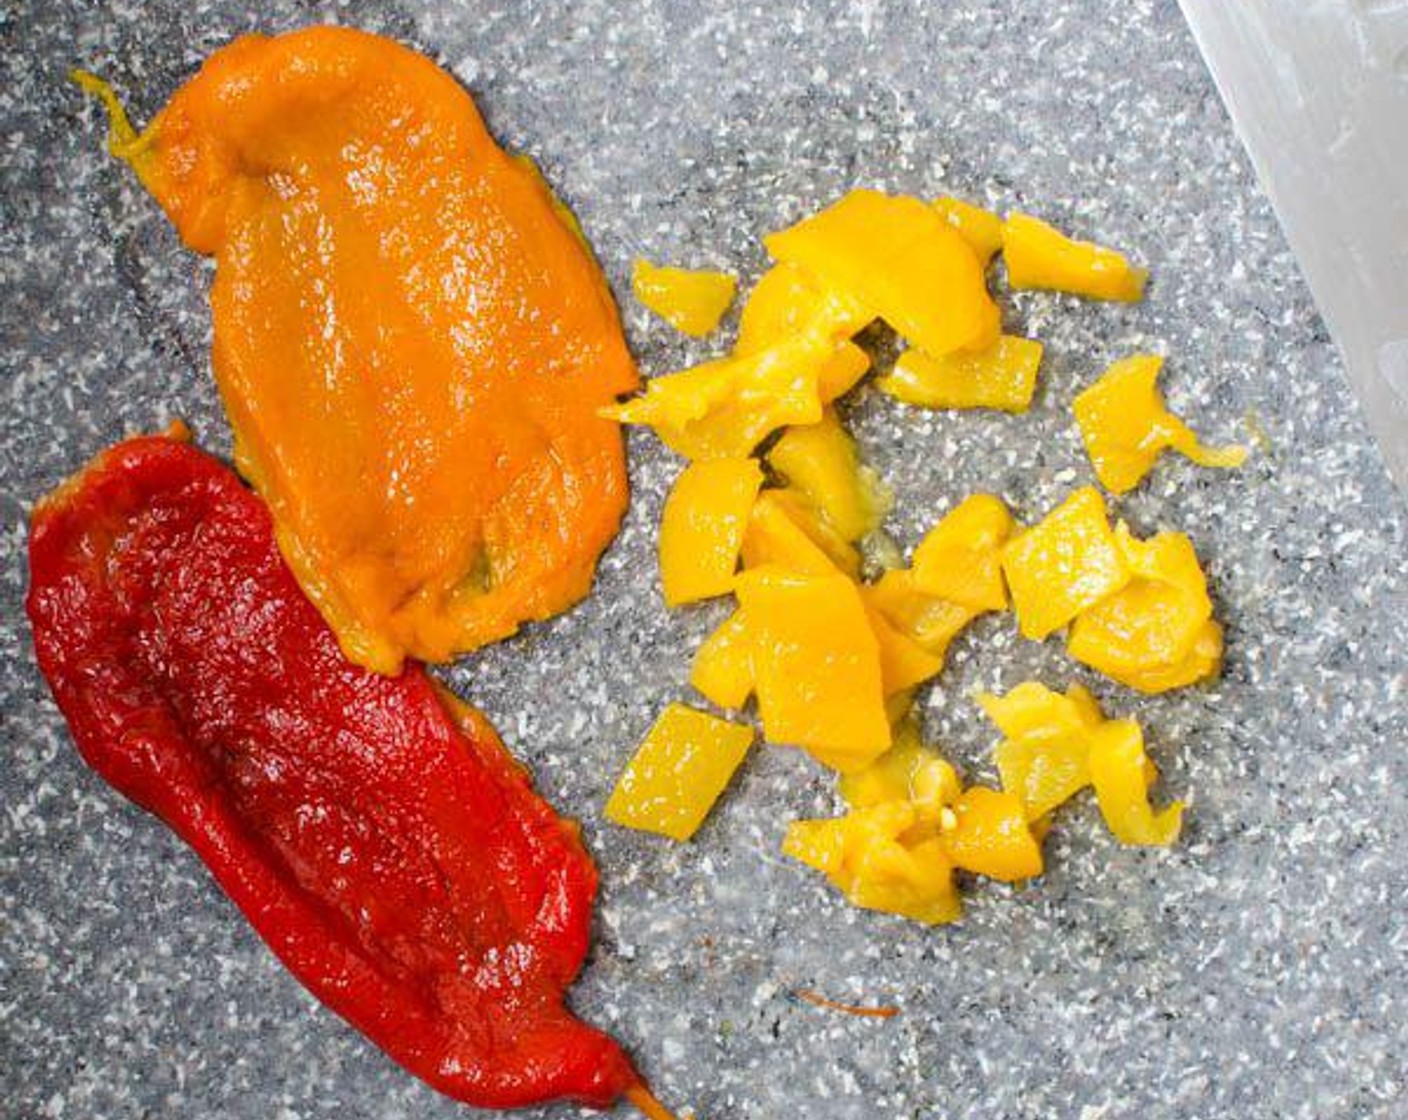 step 1 For roasted bell pepper, either use a jarred bell pepper or roast your own by heating the oven to 400 degrees F (200 degrees C) and placing the pepper on a baking sheet lined with aluminum foil (to catch juices and make for easier cleanup). Roast for 25-30 minutes or until skin is blackened and pepper inside is soft. Transfer to a bowl and cover tightly with saran wrap. Cool completely, then peel and seed the pepper.